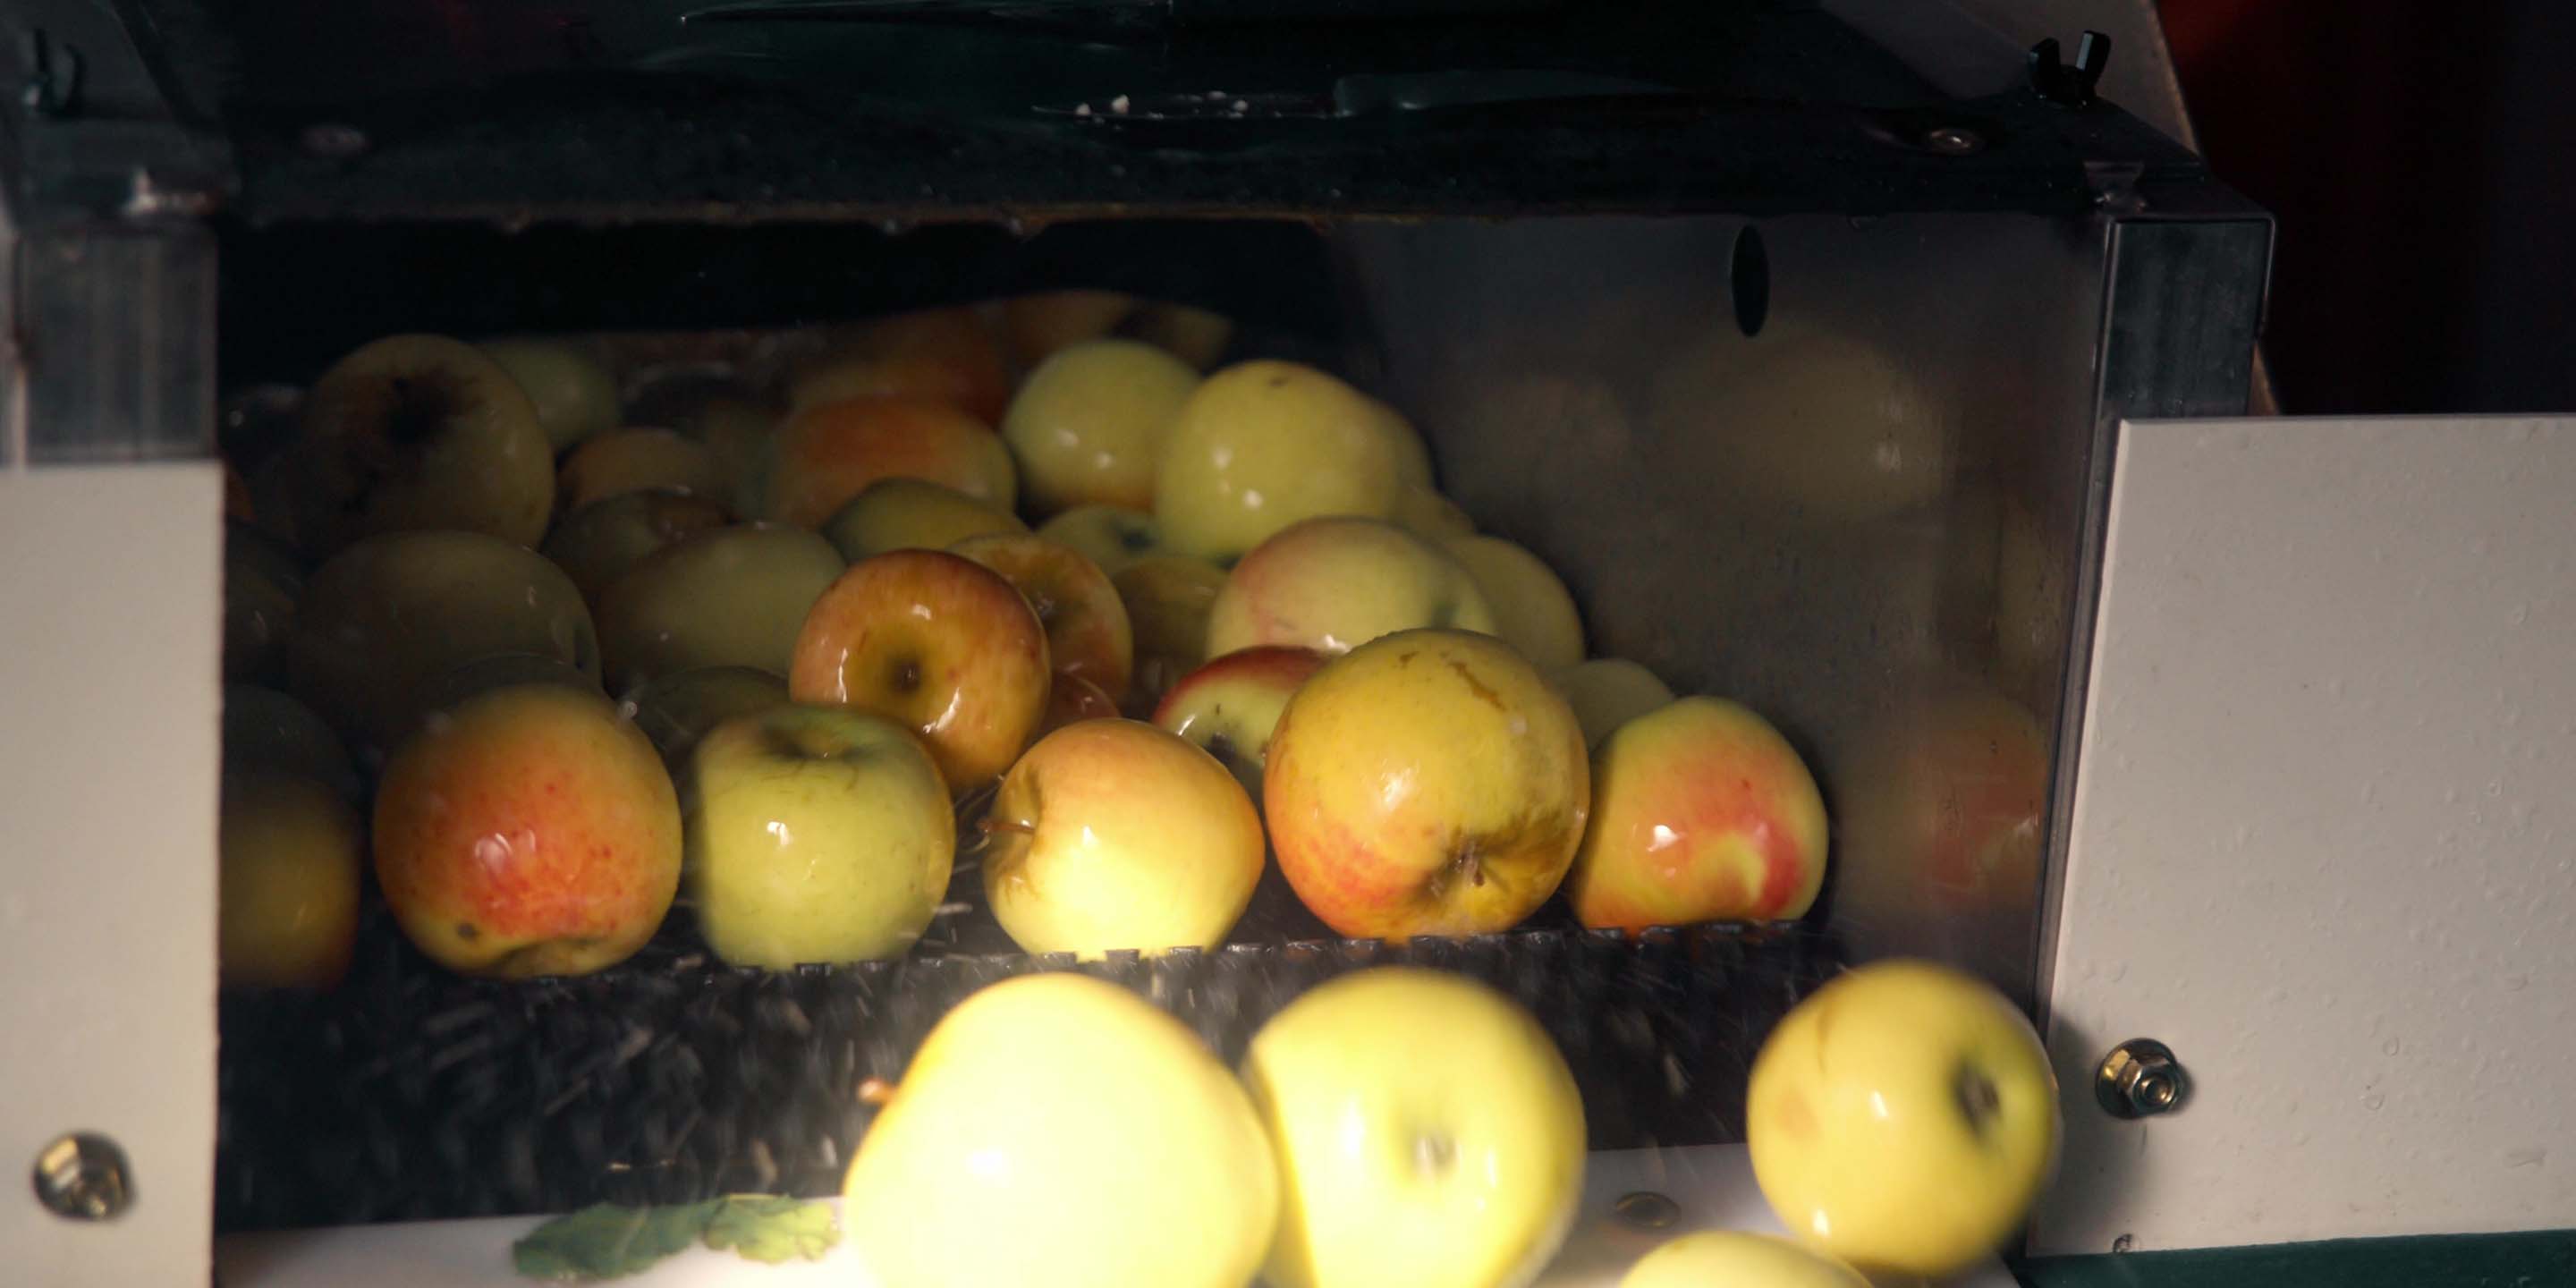 Apples going through a commercial cleaning process